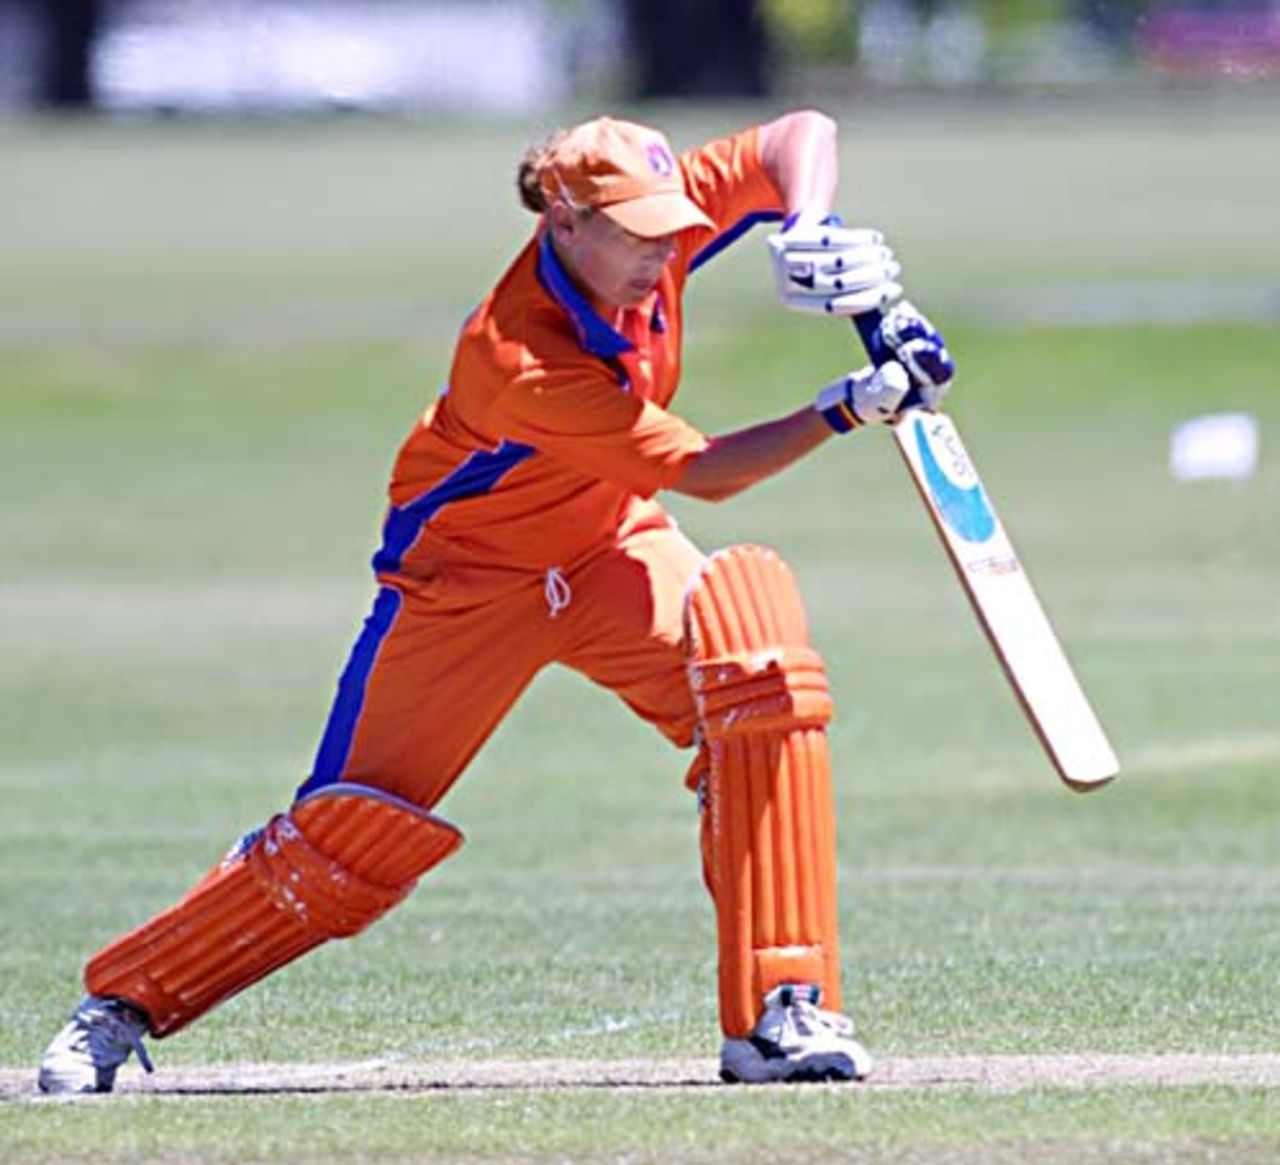 4 Dec 2000: Netherlands v South Africa, CricInfo Women's World Cup 2000 played at Hagley Park no.2, Christchurch